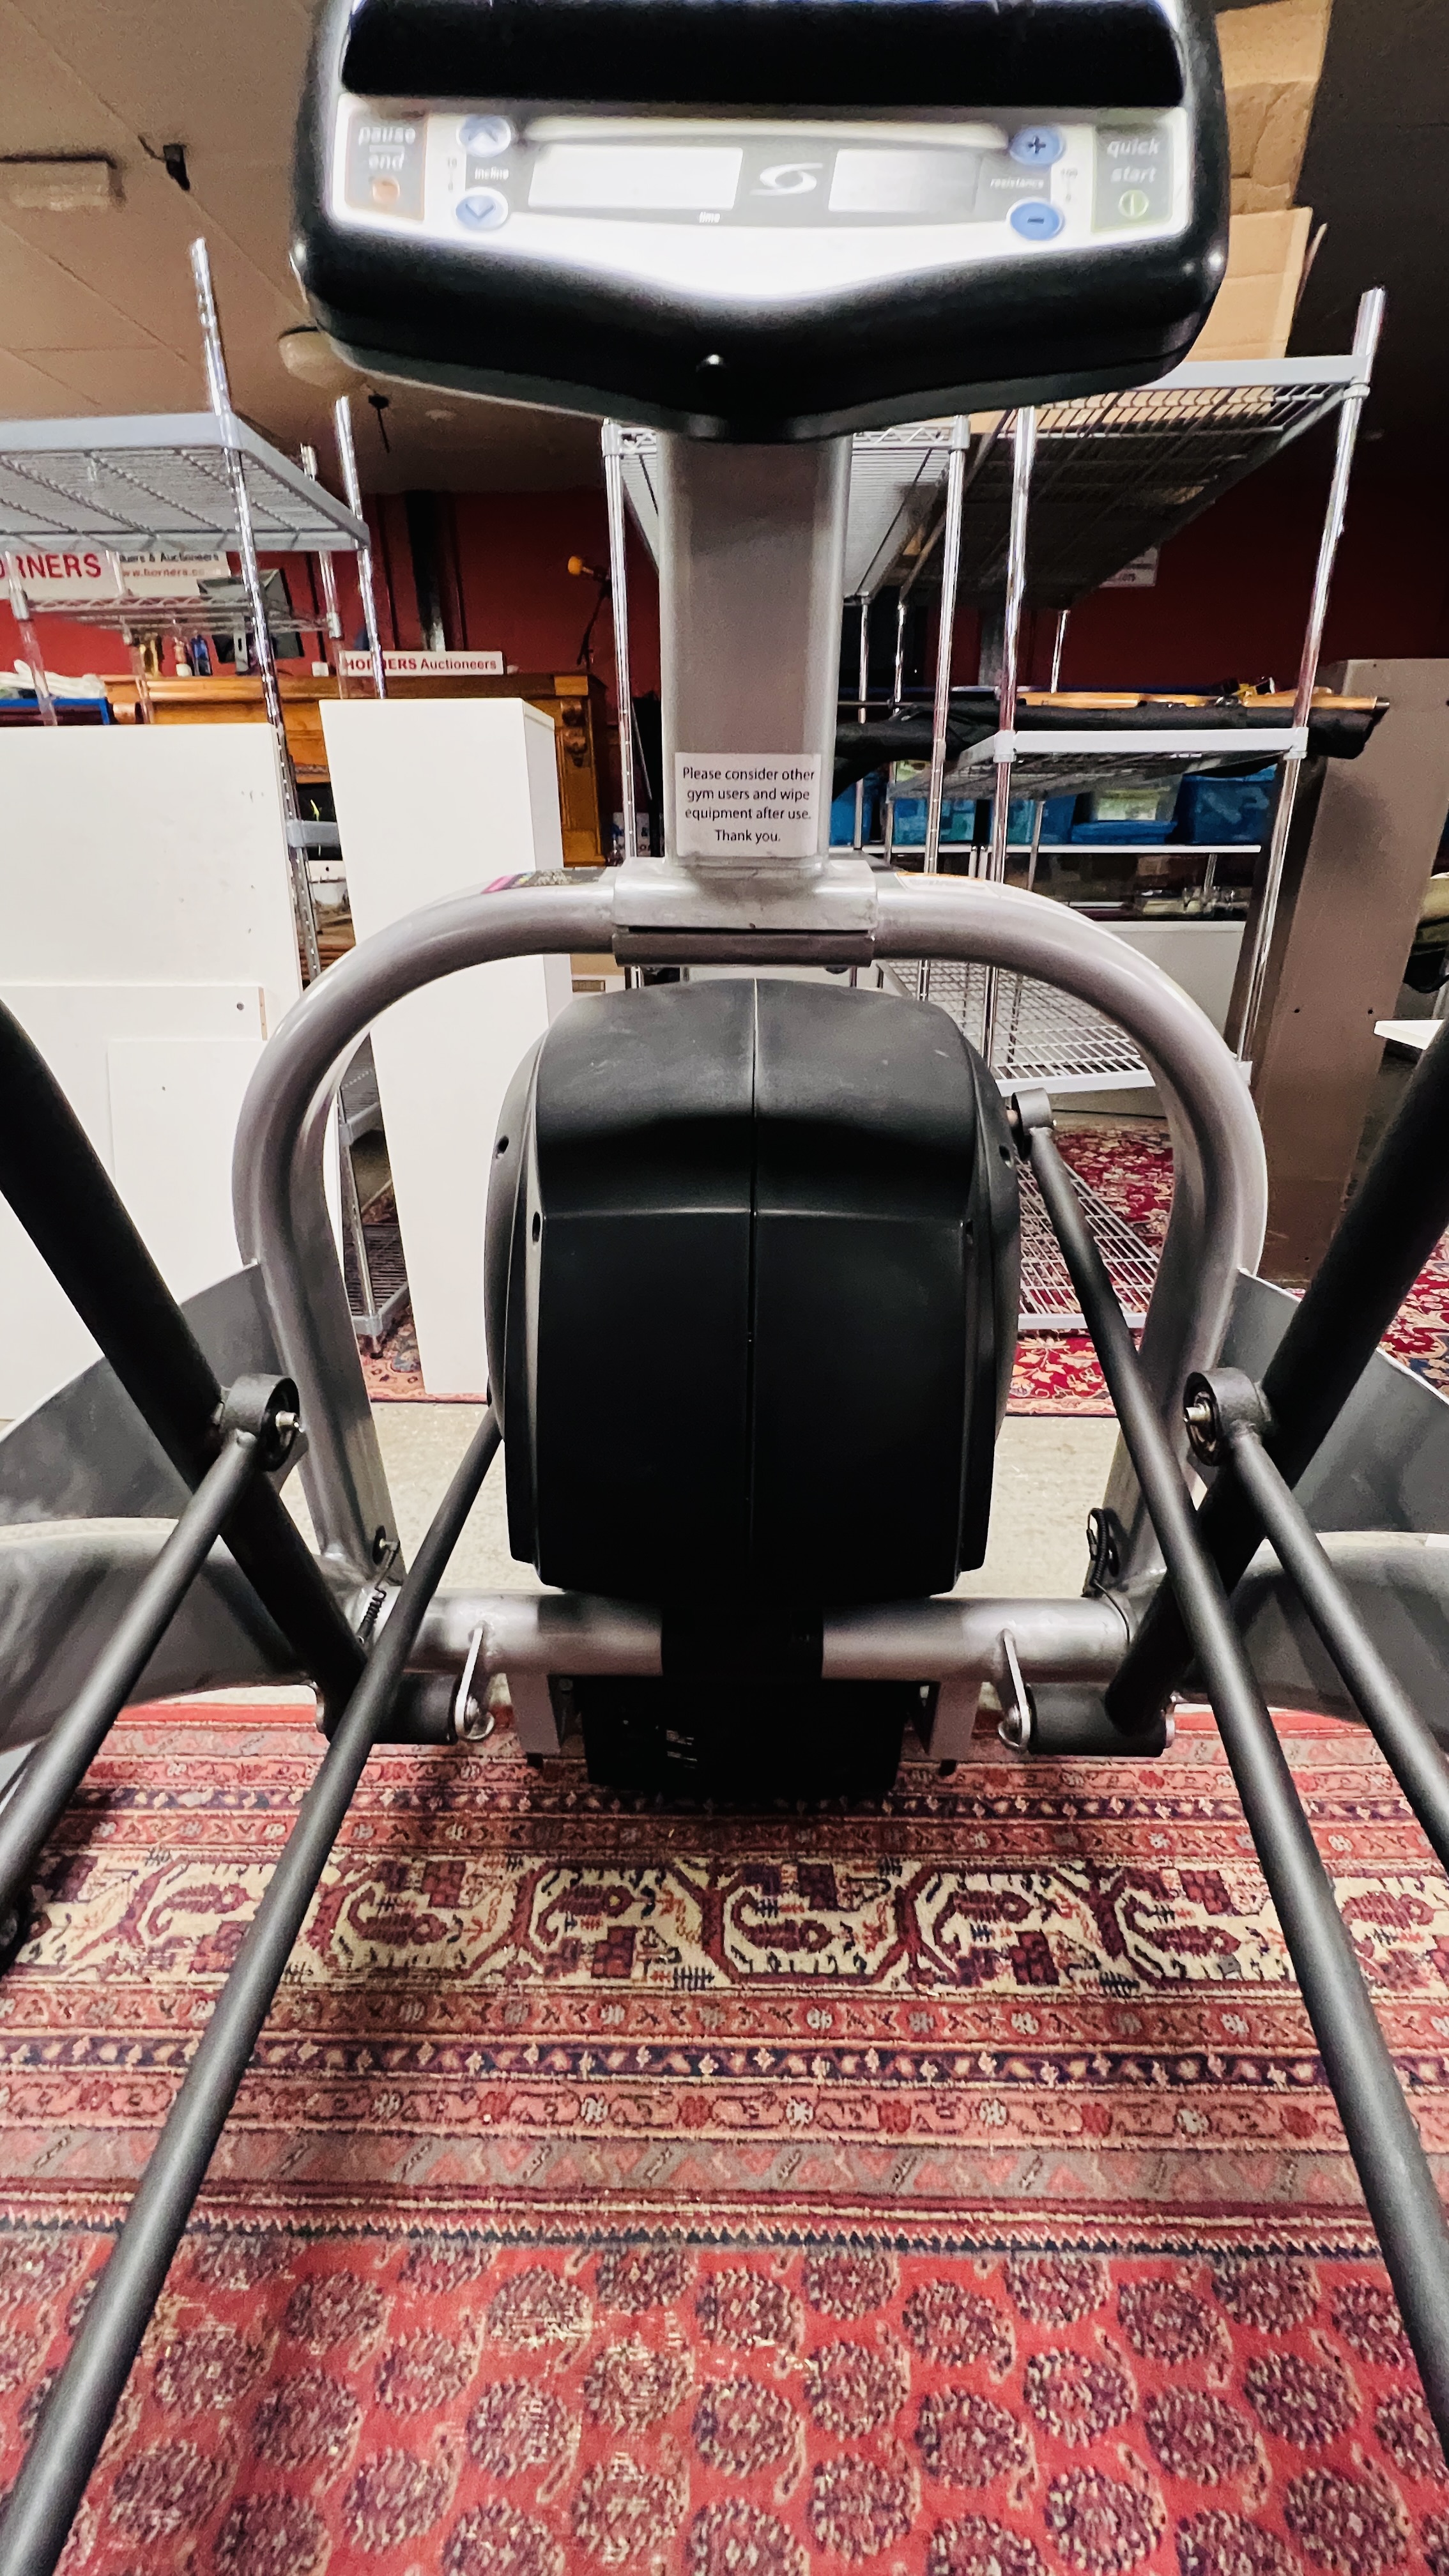 CYBEX PROFESSIONAL GYM ARC TRAINER MODEL 610 A - SOLD AS SEEN - CONDITION OF SALE - EQUIPMENT HAS - Image 4 of 6